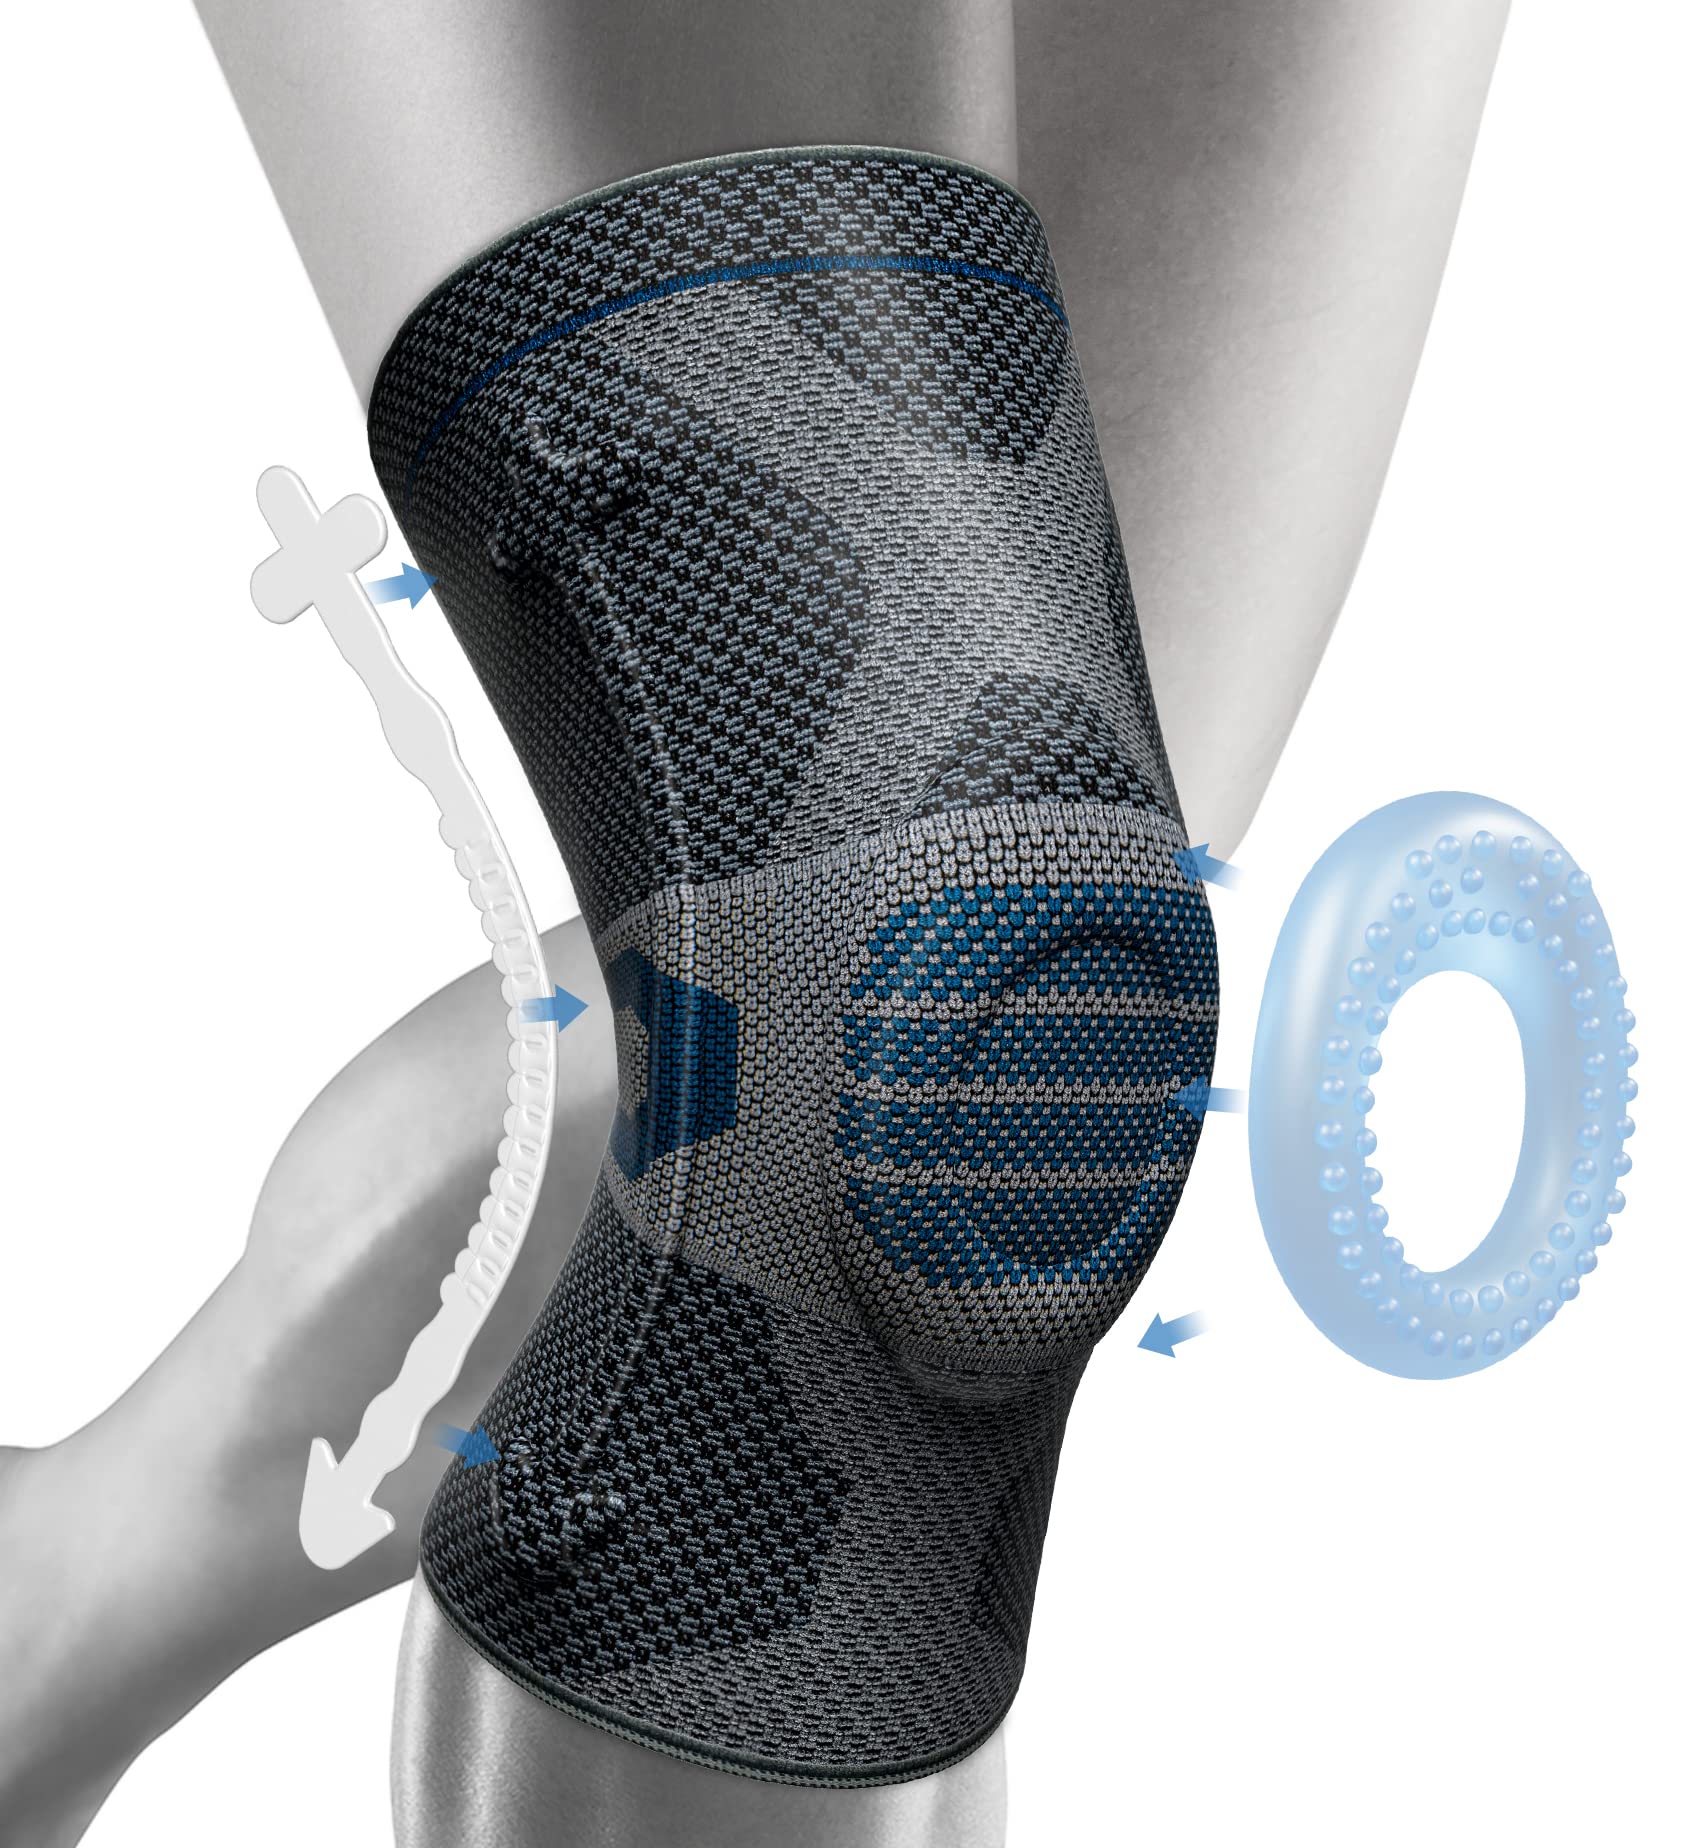 PURE HEALTH KNEE SUPPORT BRACE COMPRESSION SLEEVE FOR ARTHRITIS